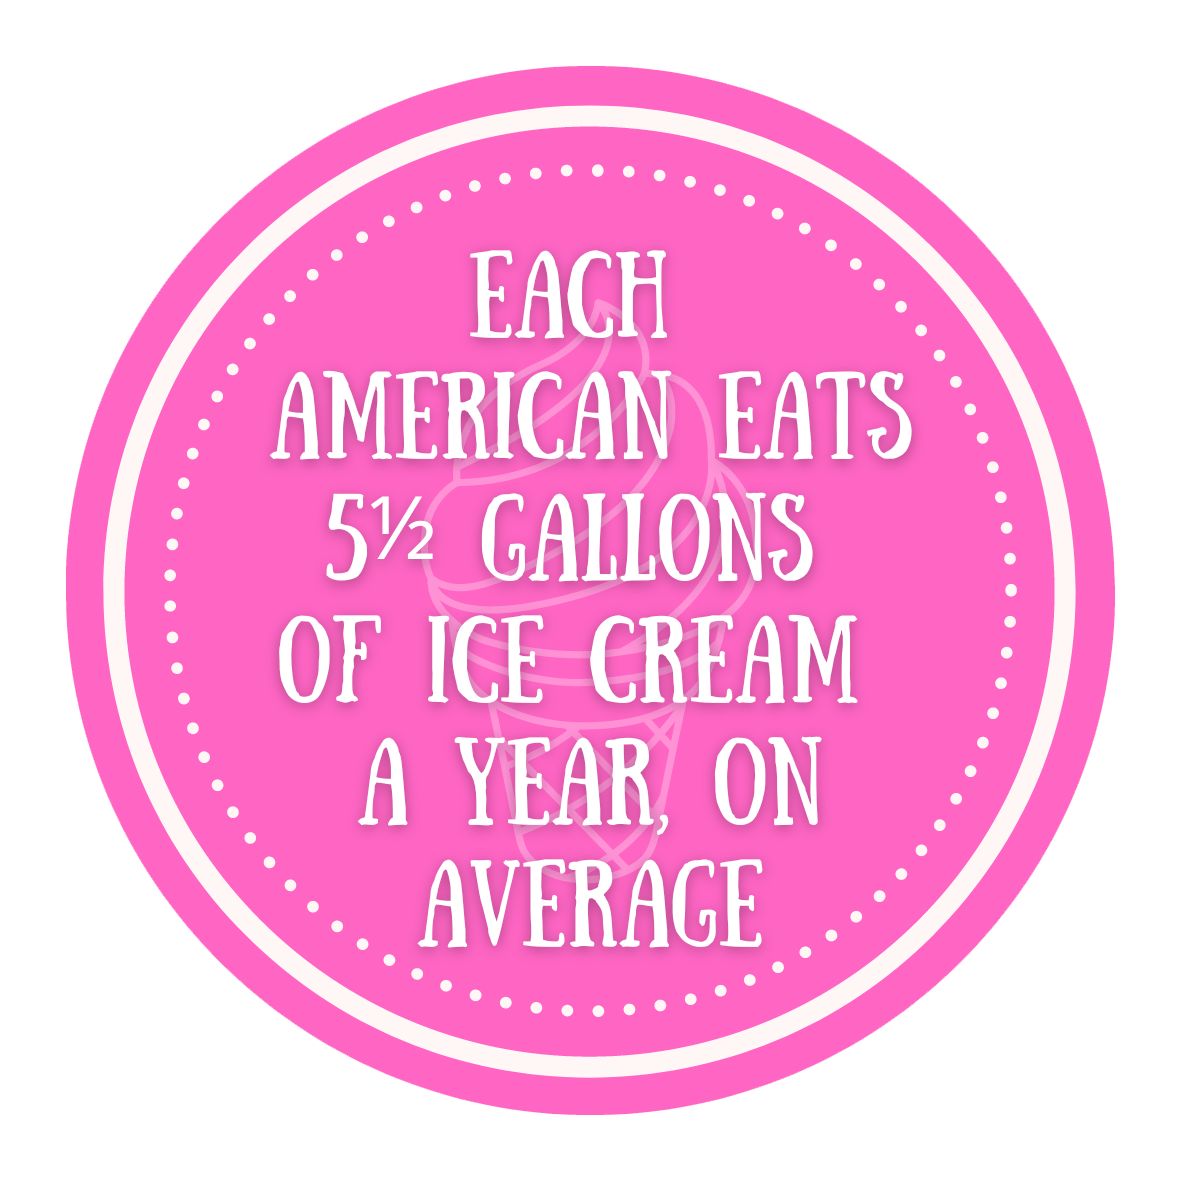 Each American eats 5.5 gallons of ice cream a year, on average.